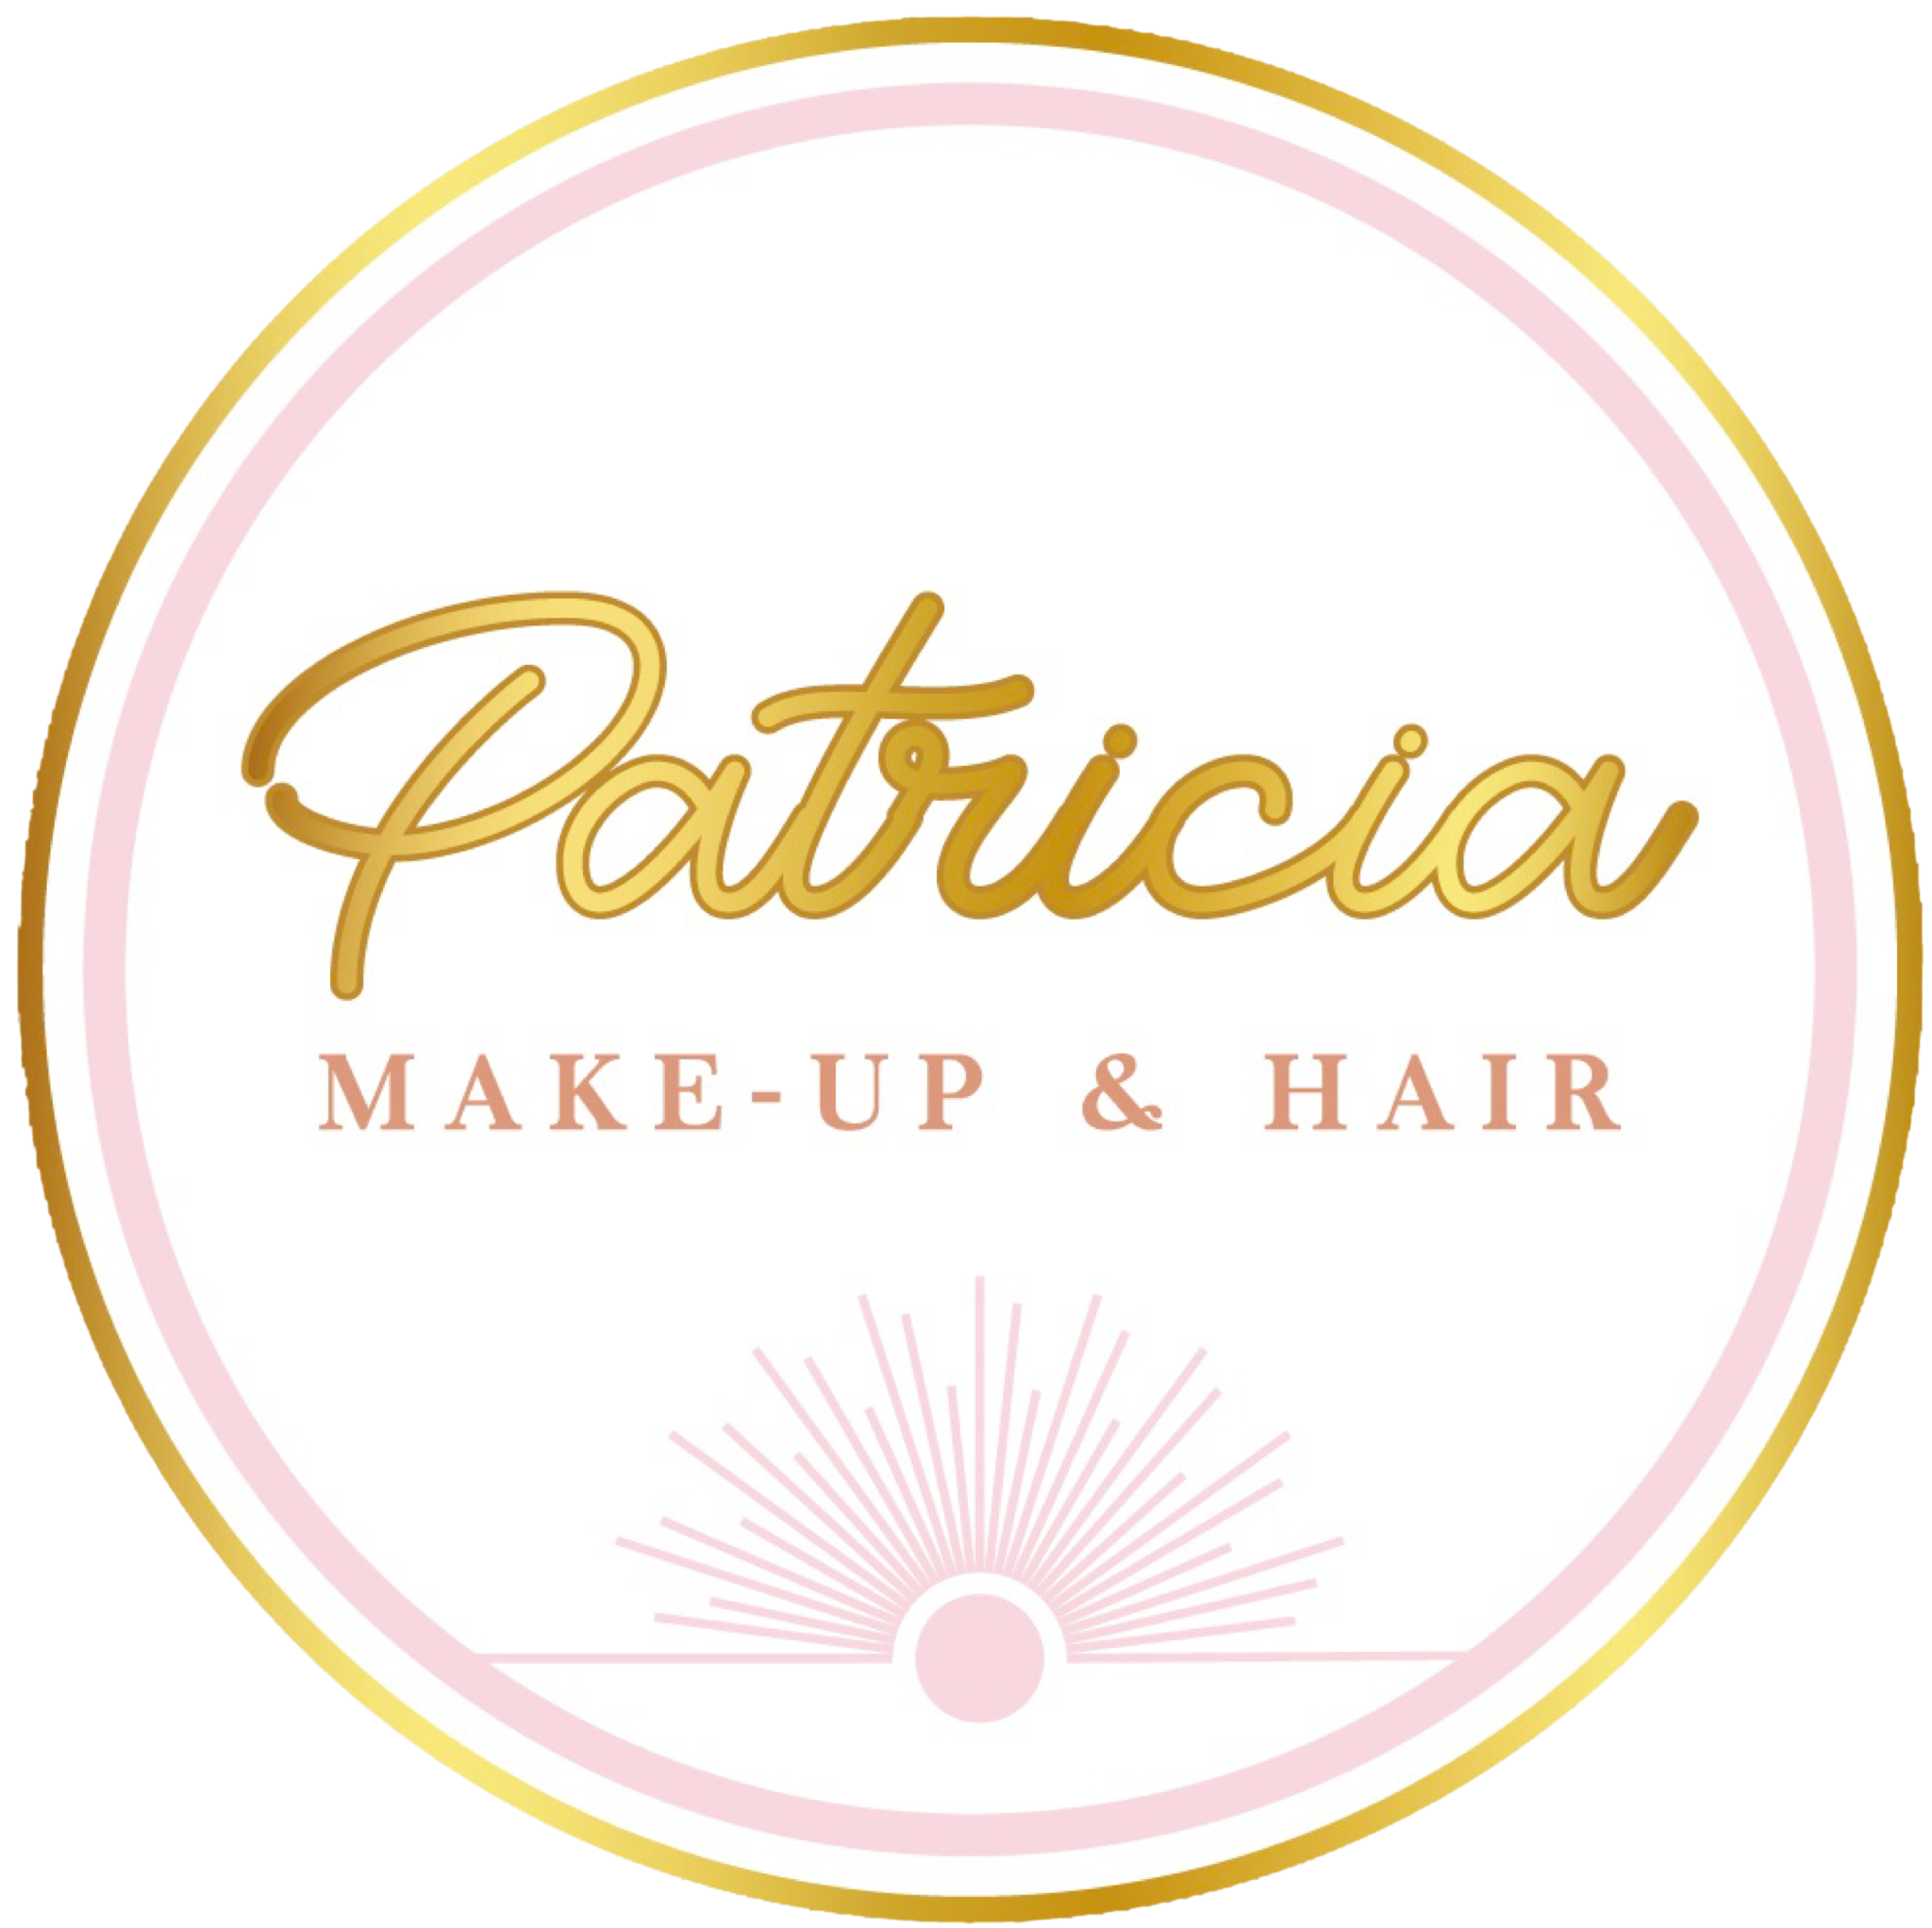 Make-up and hairartist Patricia ter koolt